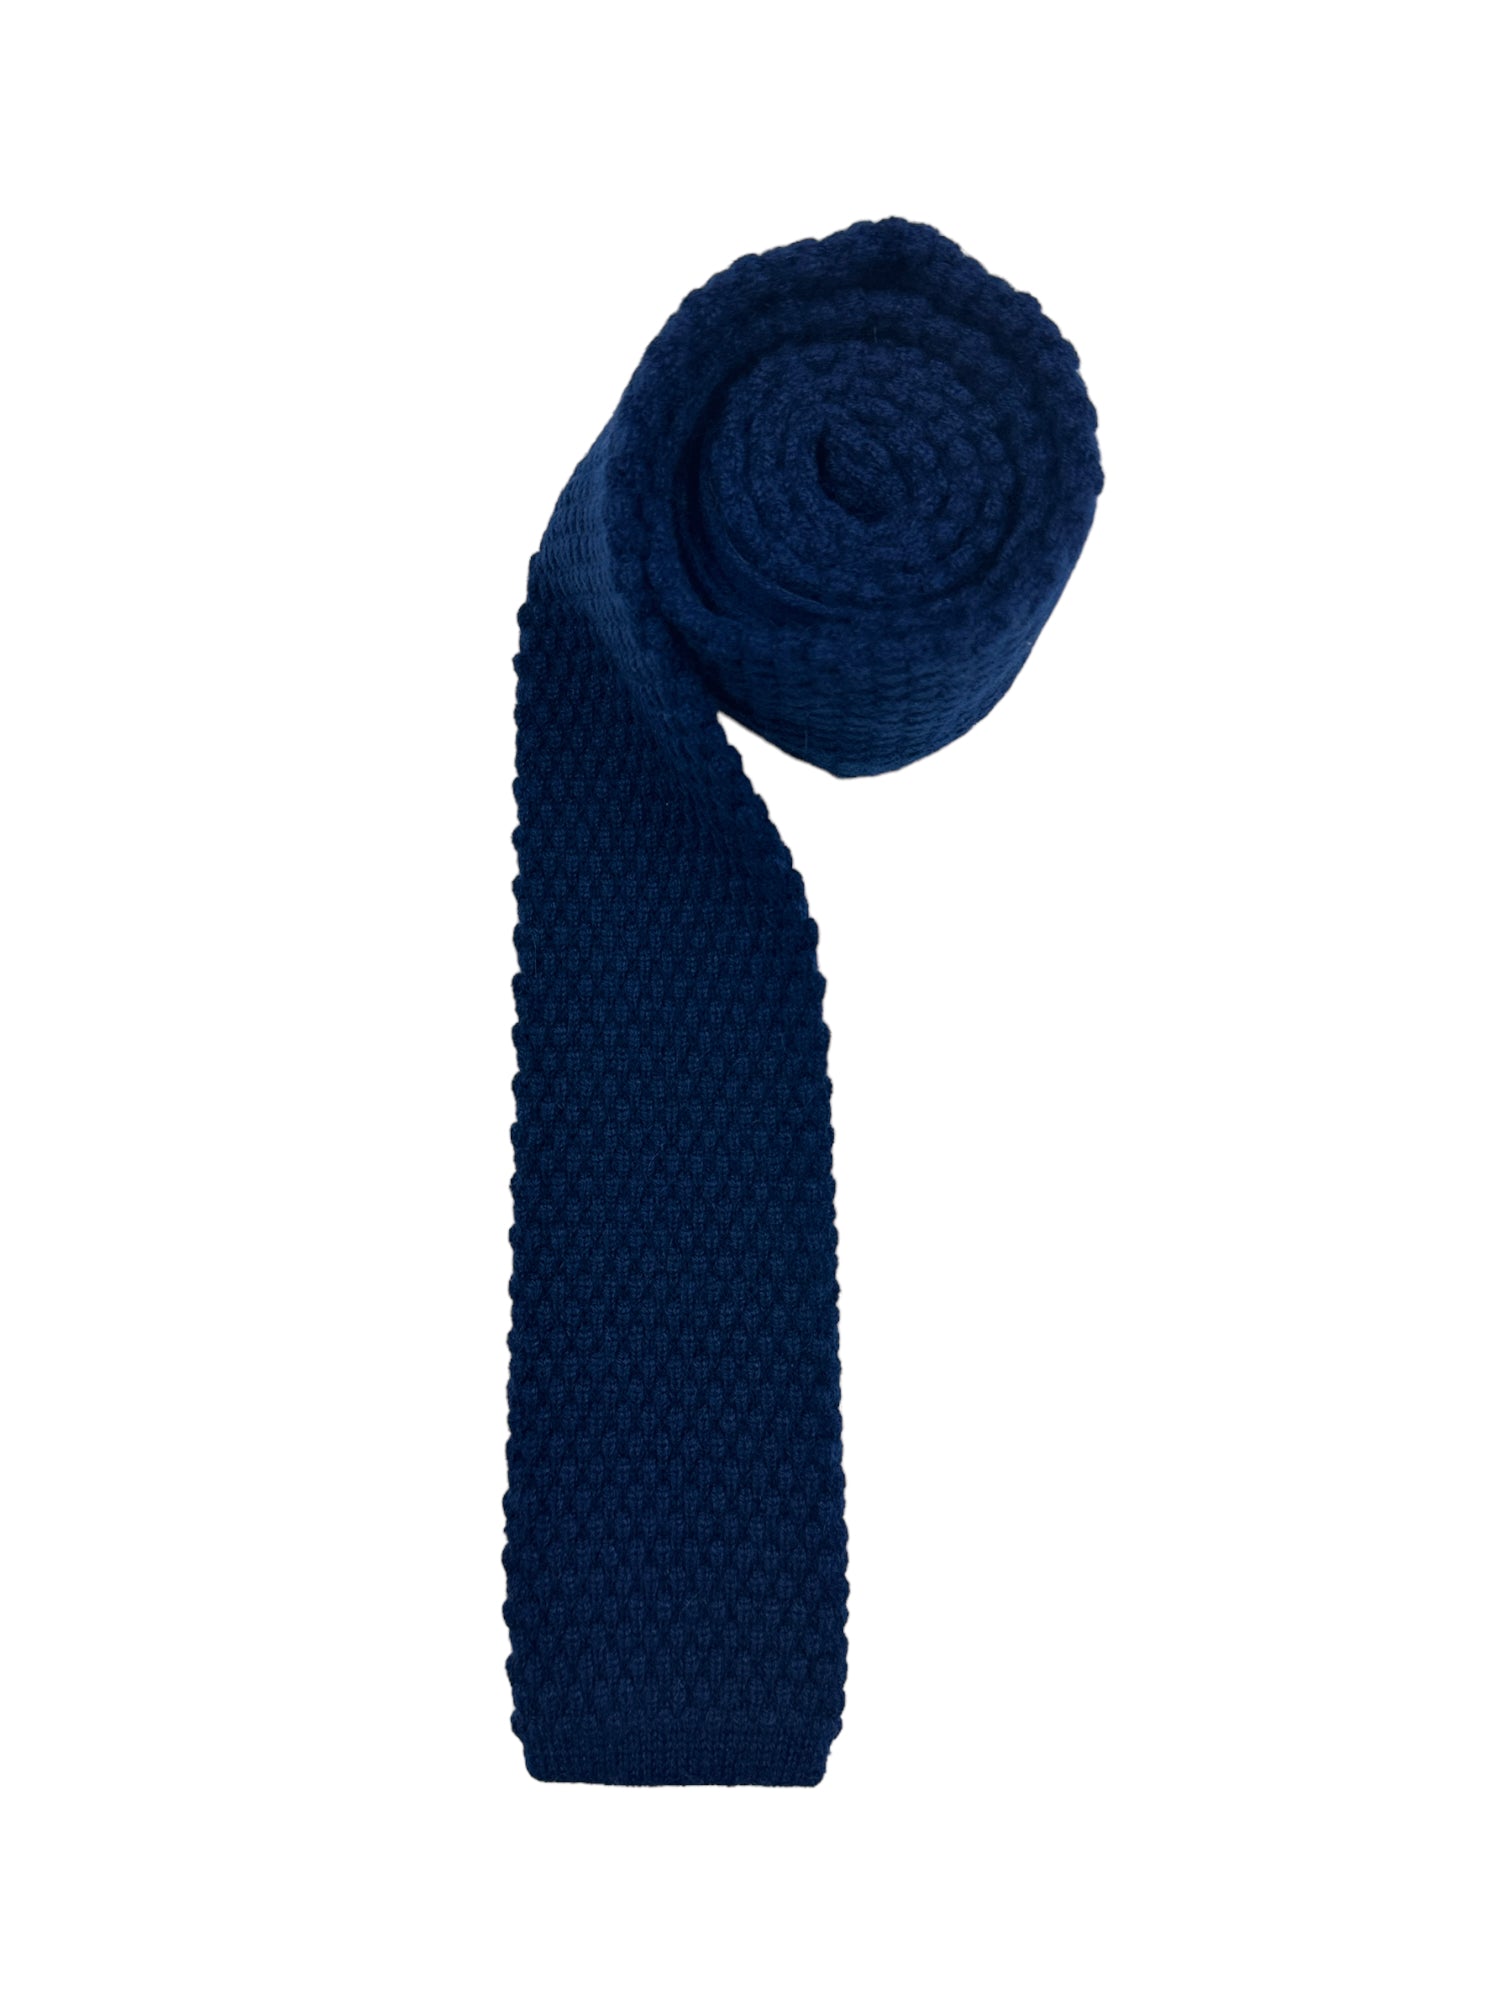 Kiton Blue Cashmere Knitted Tie